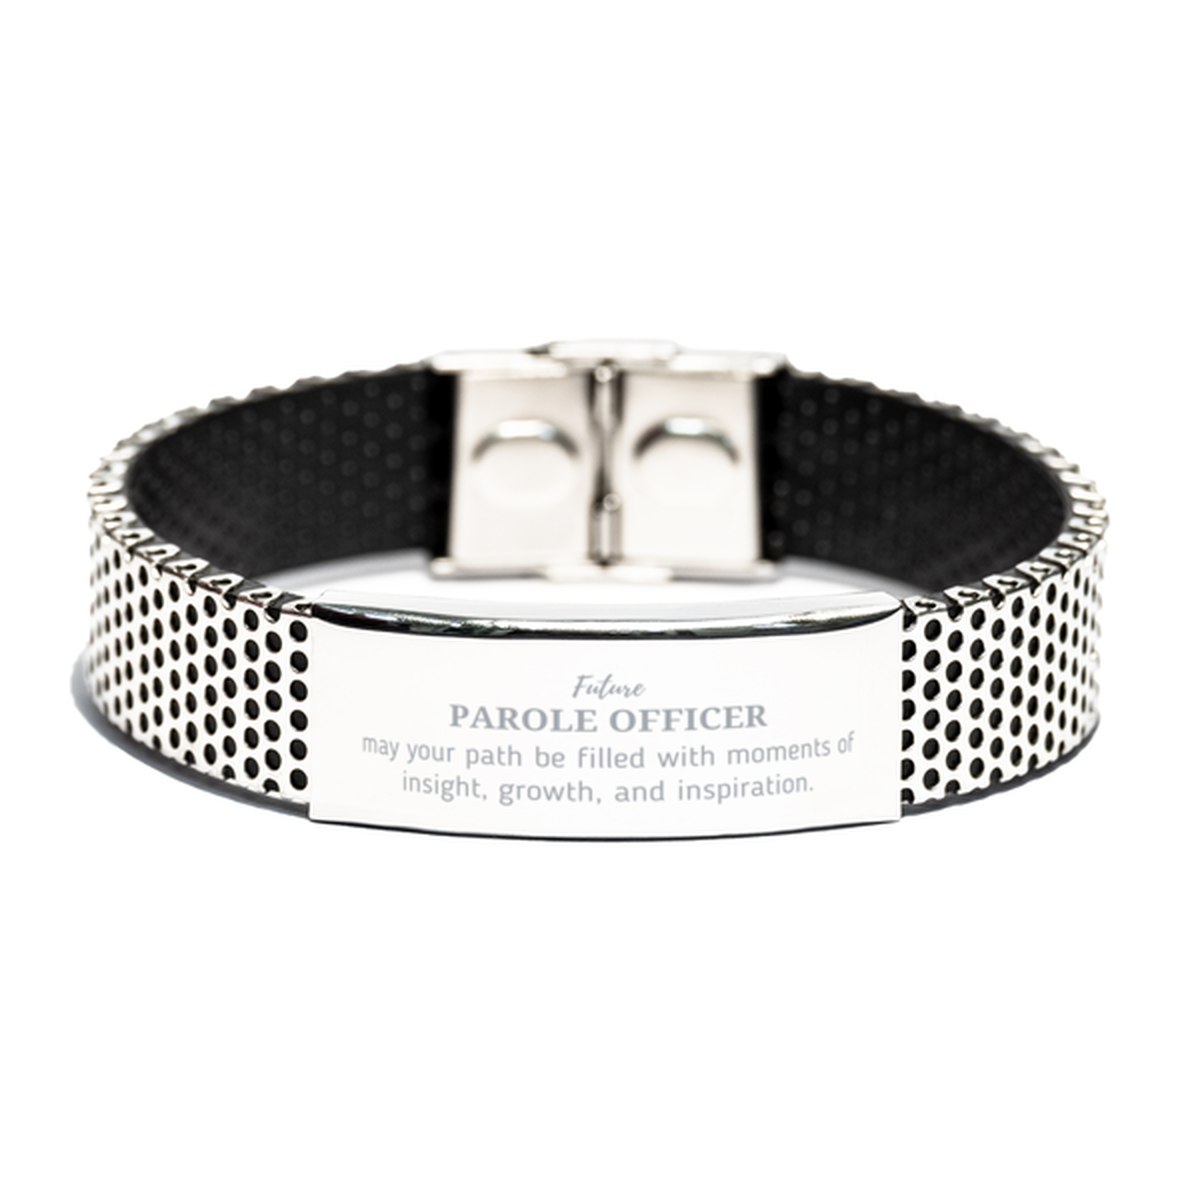 Future Parole Officer Gifts, May your path be filled with moments of insight, Graduation Gifts for New Parole Officer, Christmas Unique Stainless Steel Bracelet For Men, Women, Friends